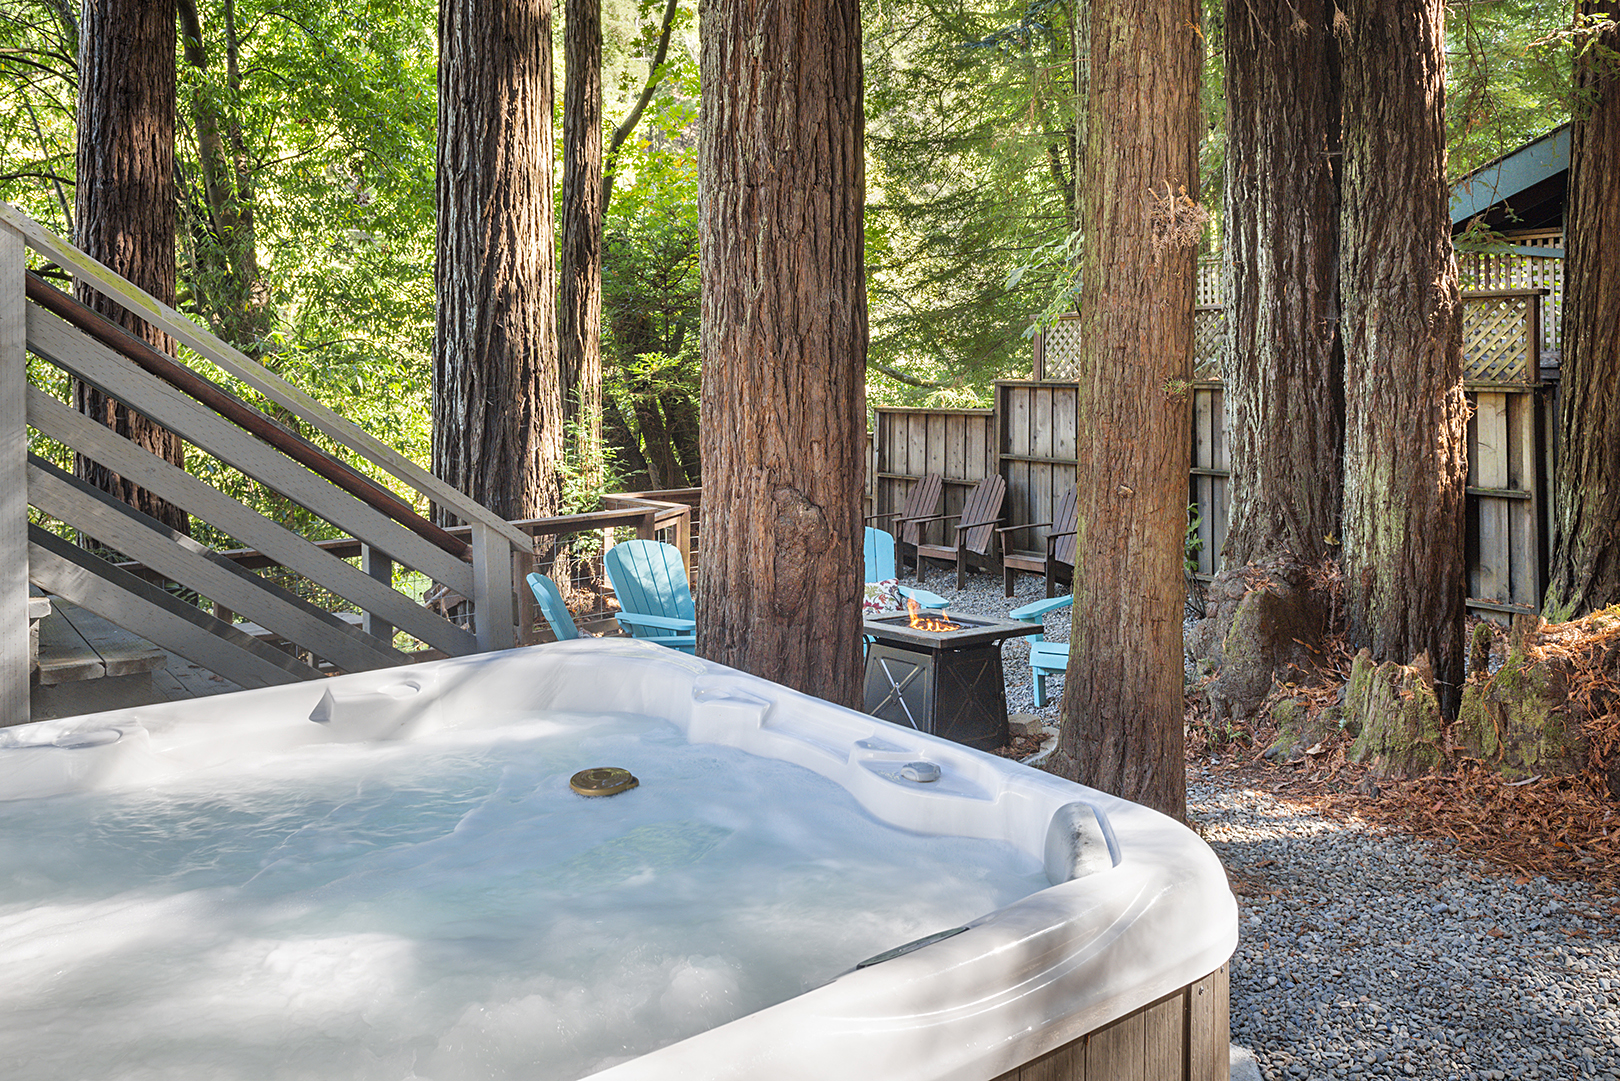 Hot tub under the redwood trees and stars.